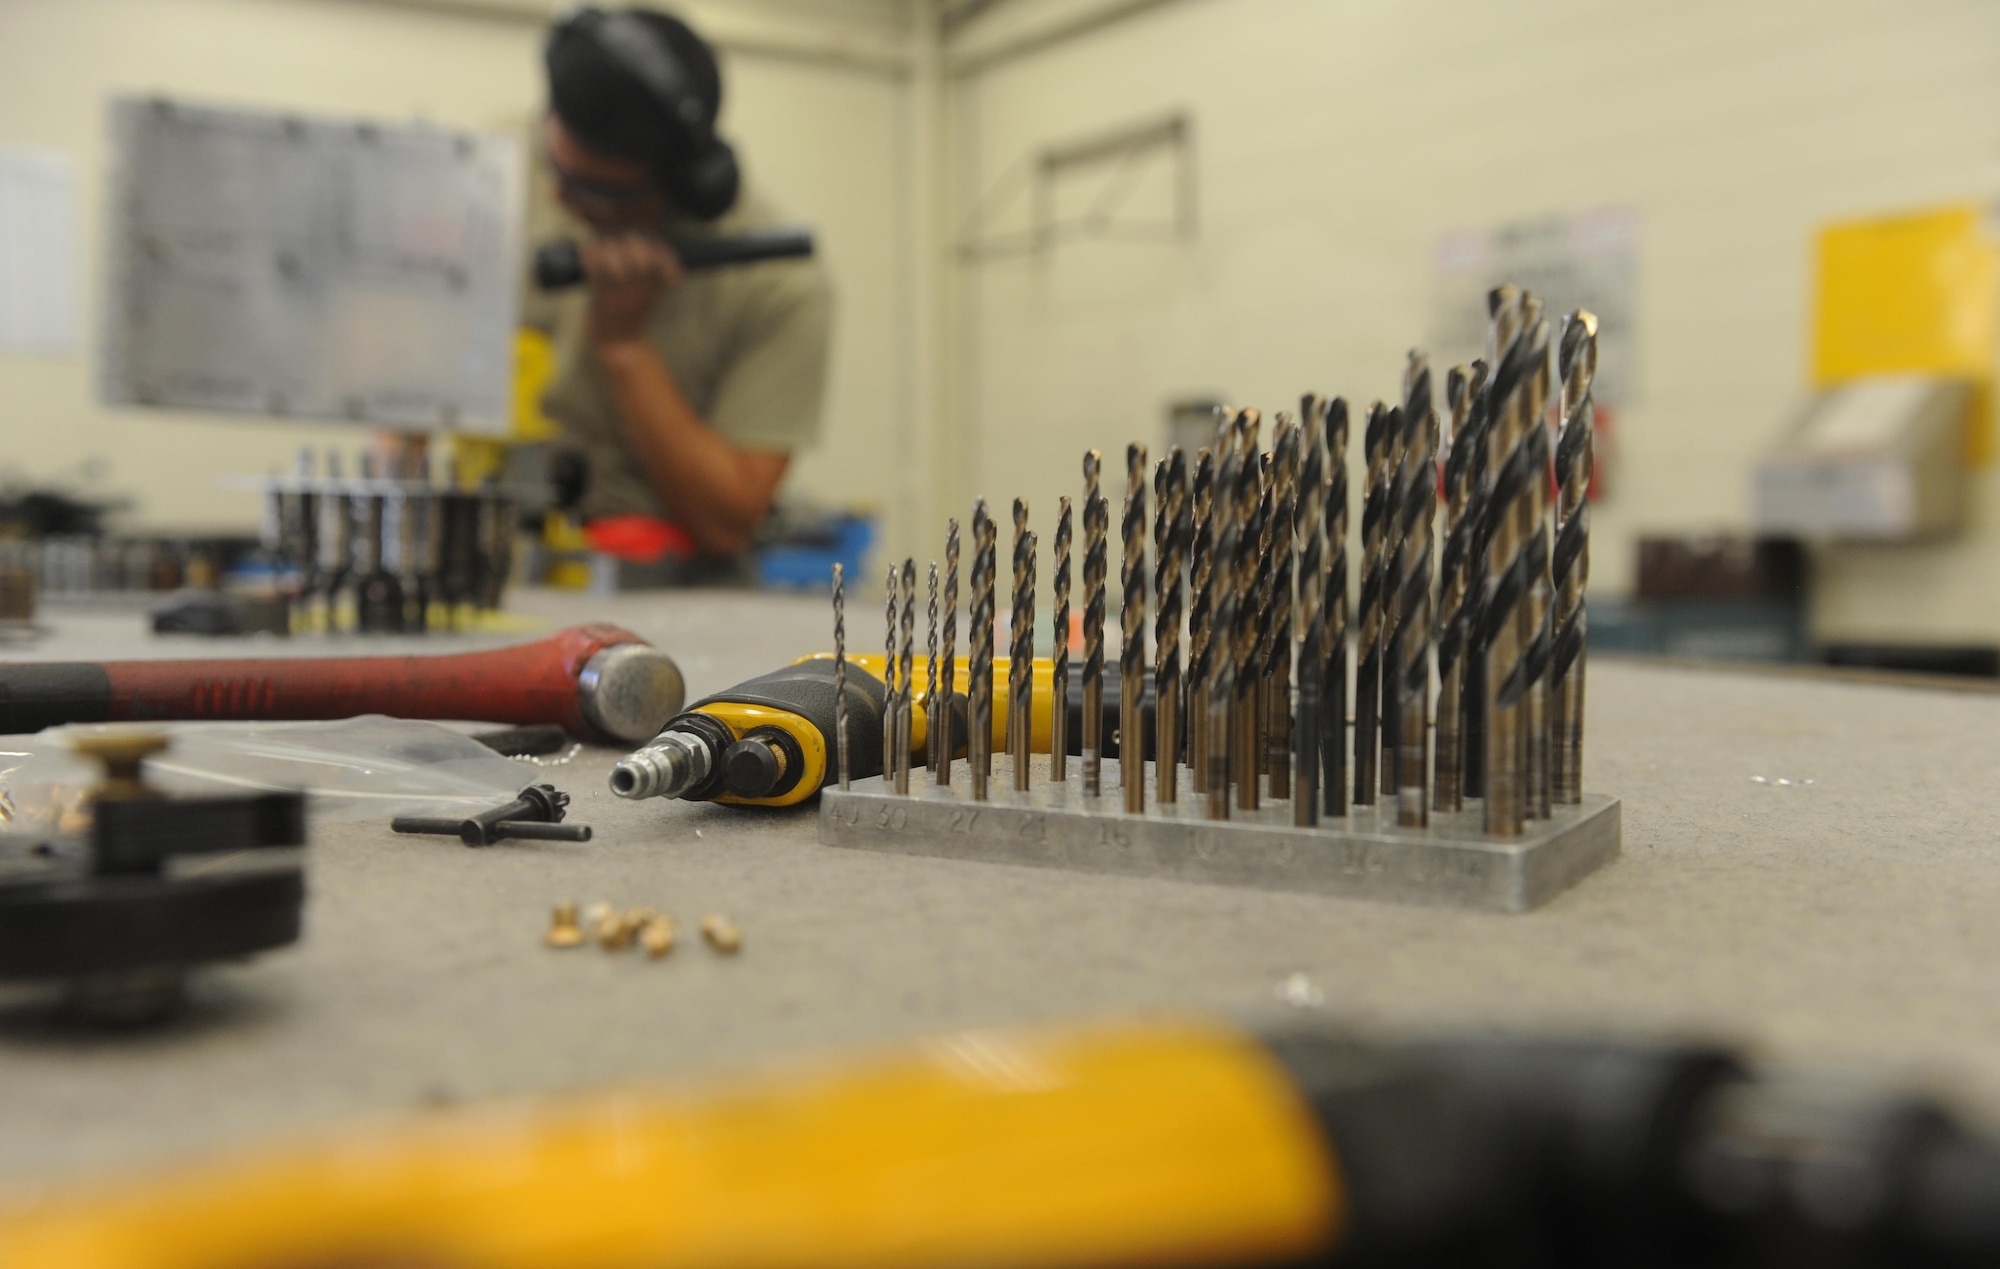 Tools for Airmen of the 7th Equipment Maintenance Squadron are ready for use at any time and for any repair. Along with the heavy machinery in the shop, Airmen use a variety of carefully inspected hand tools, such as hammers, drills, saws and files to get a precise shape. (U.S. Air Force photo by Airman 1st Class Rebecca Van Syoc)